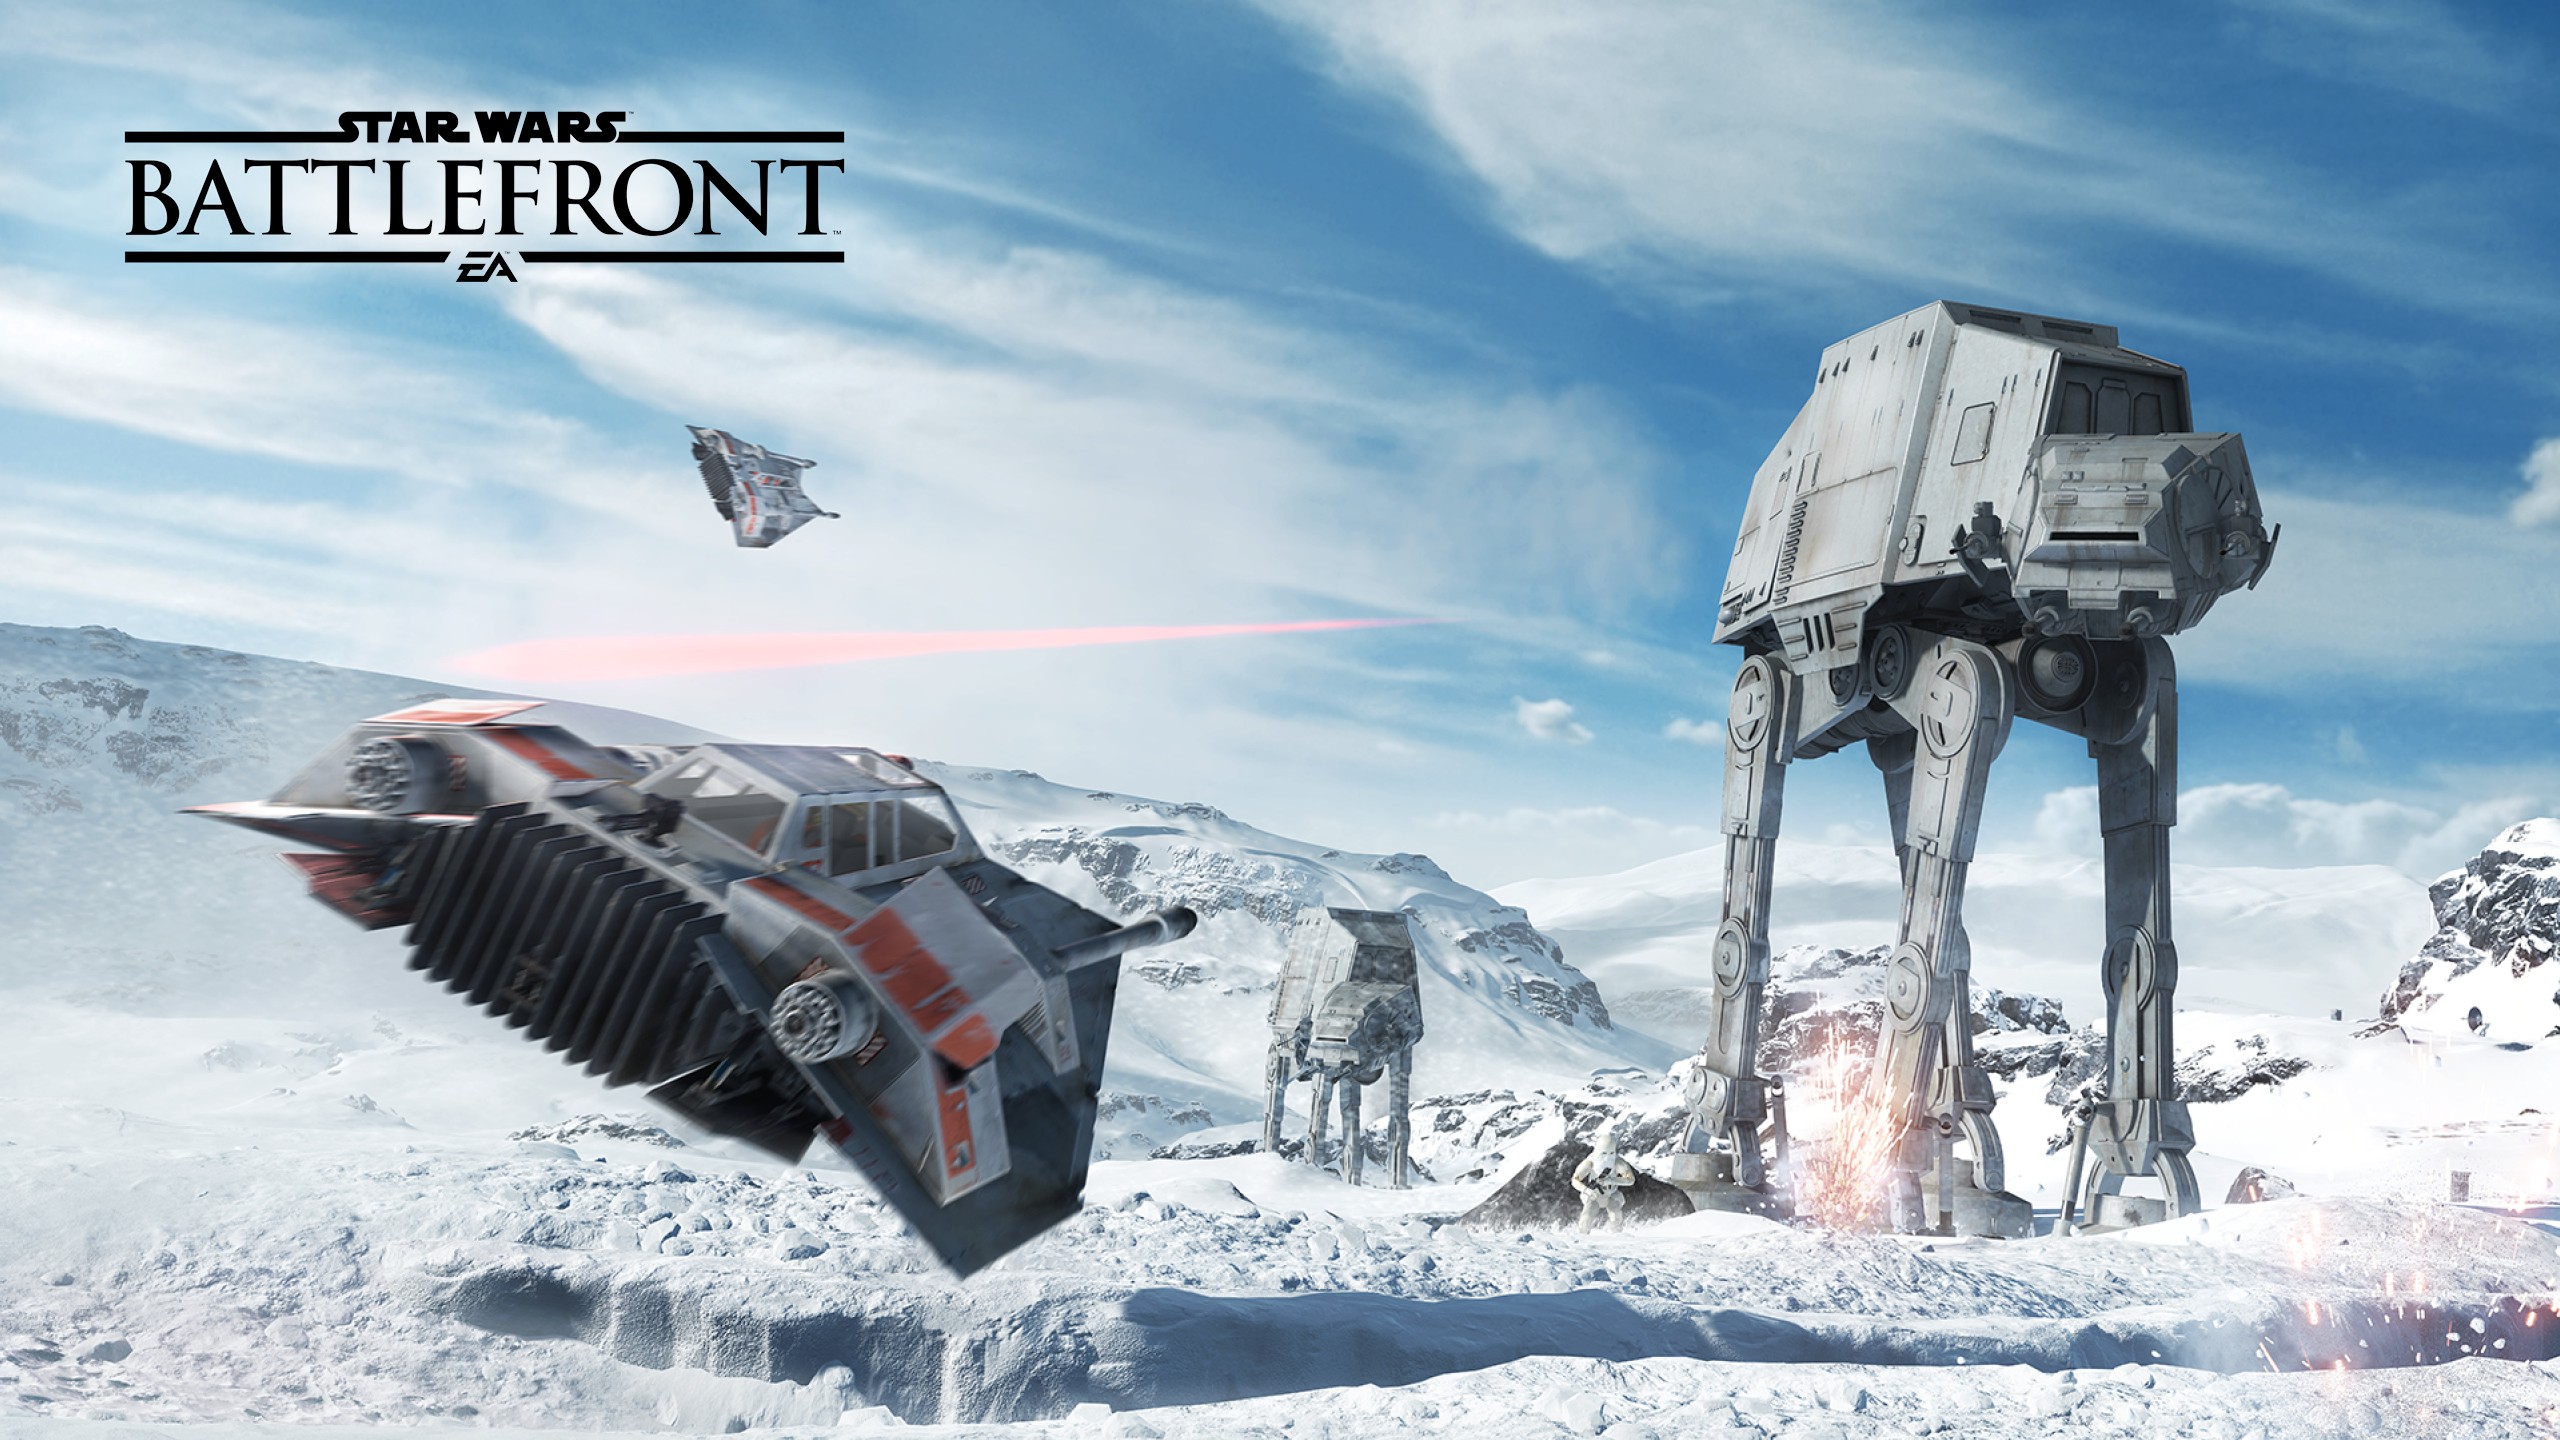 General 2560x1440 Star Wars: Battlefront EA Games PC gaming video games video game art science fiction T-47 airspeeder  AT-AT vehicle Electronic Arts EA DICE battle